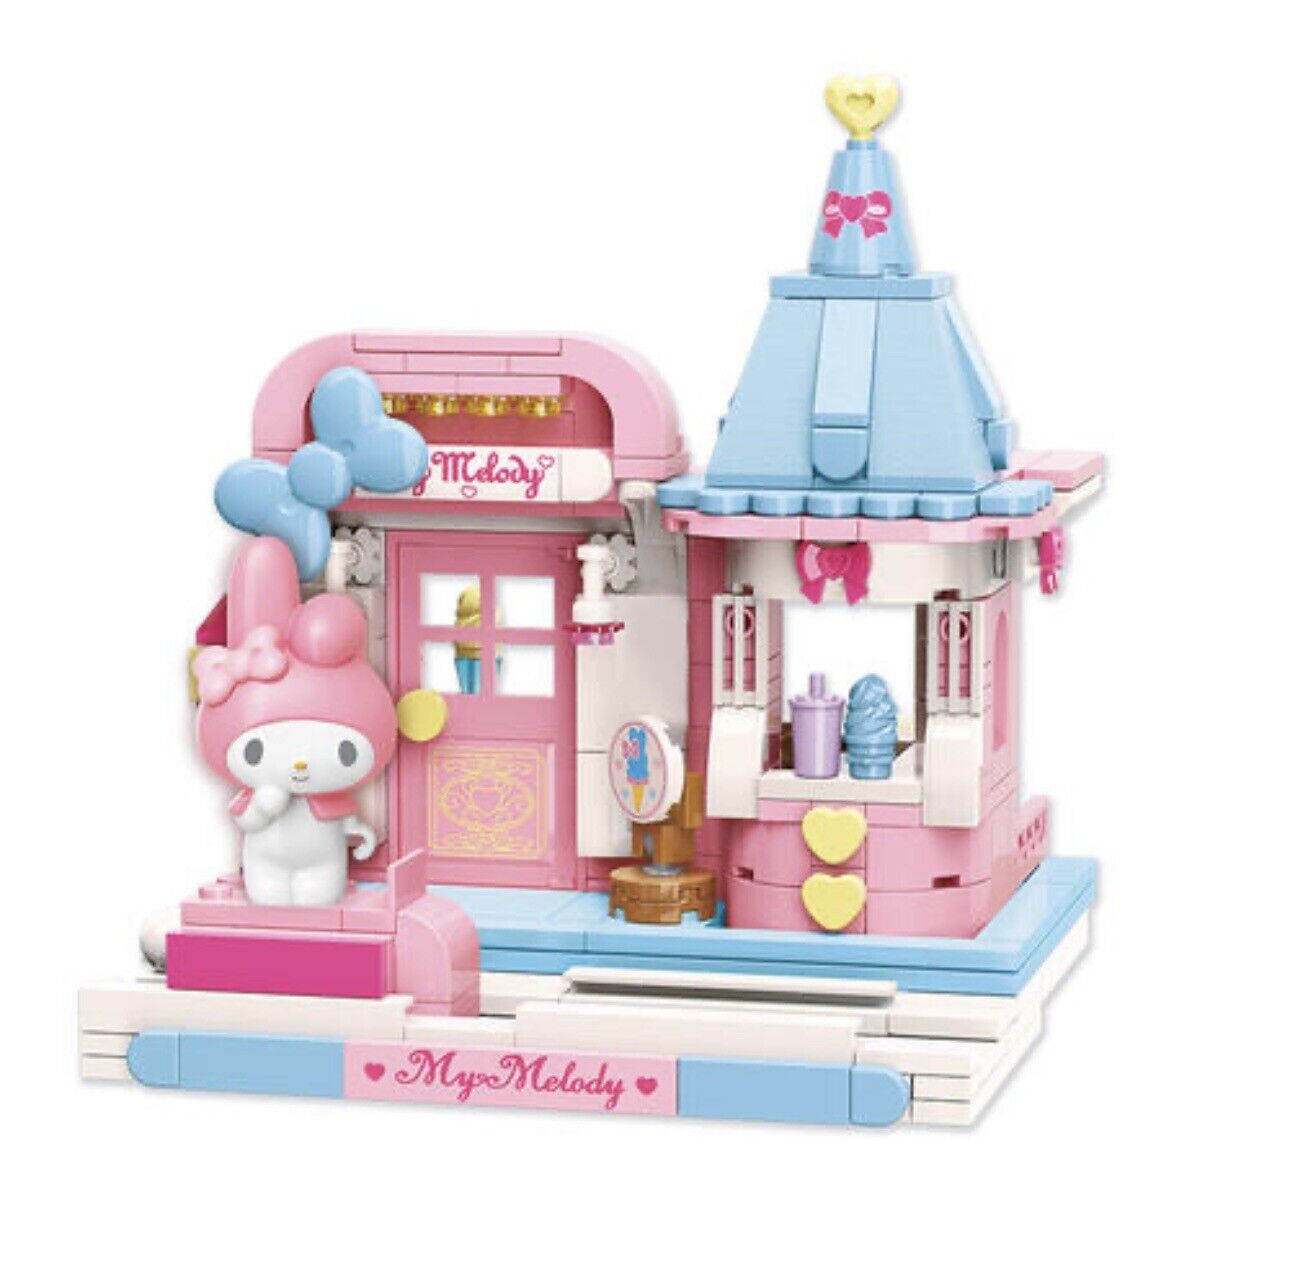 Sanrio Assembled Toy Building Blocks Me Melody Sweet Ice Cream House